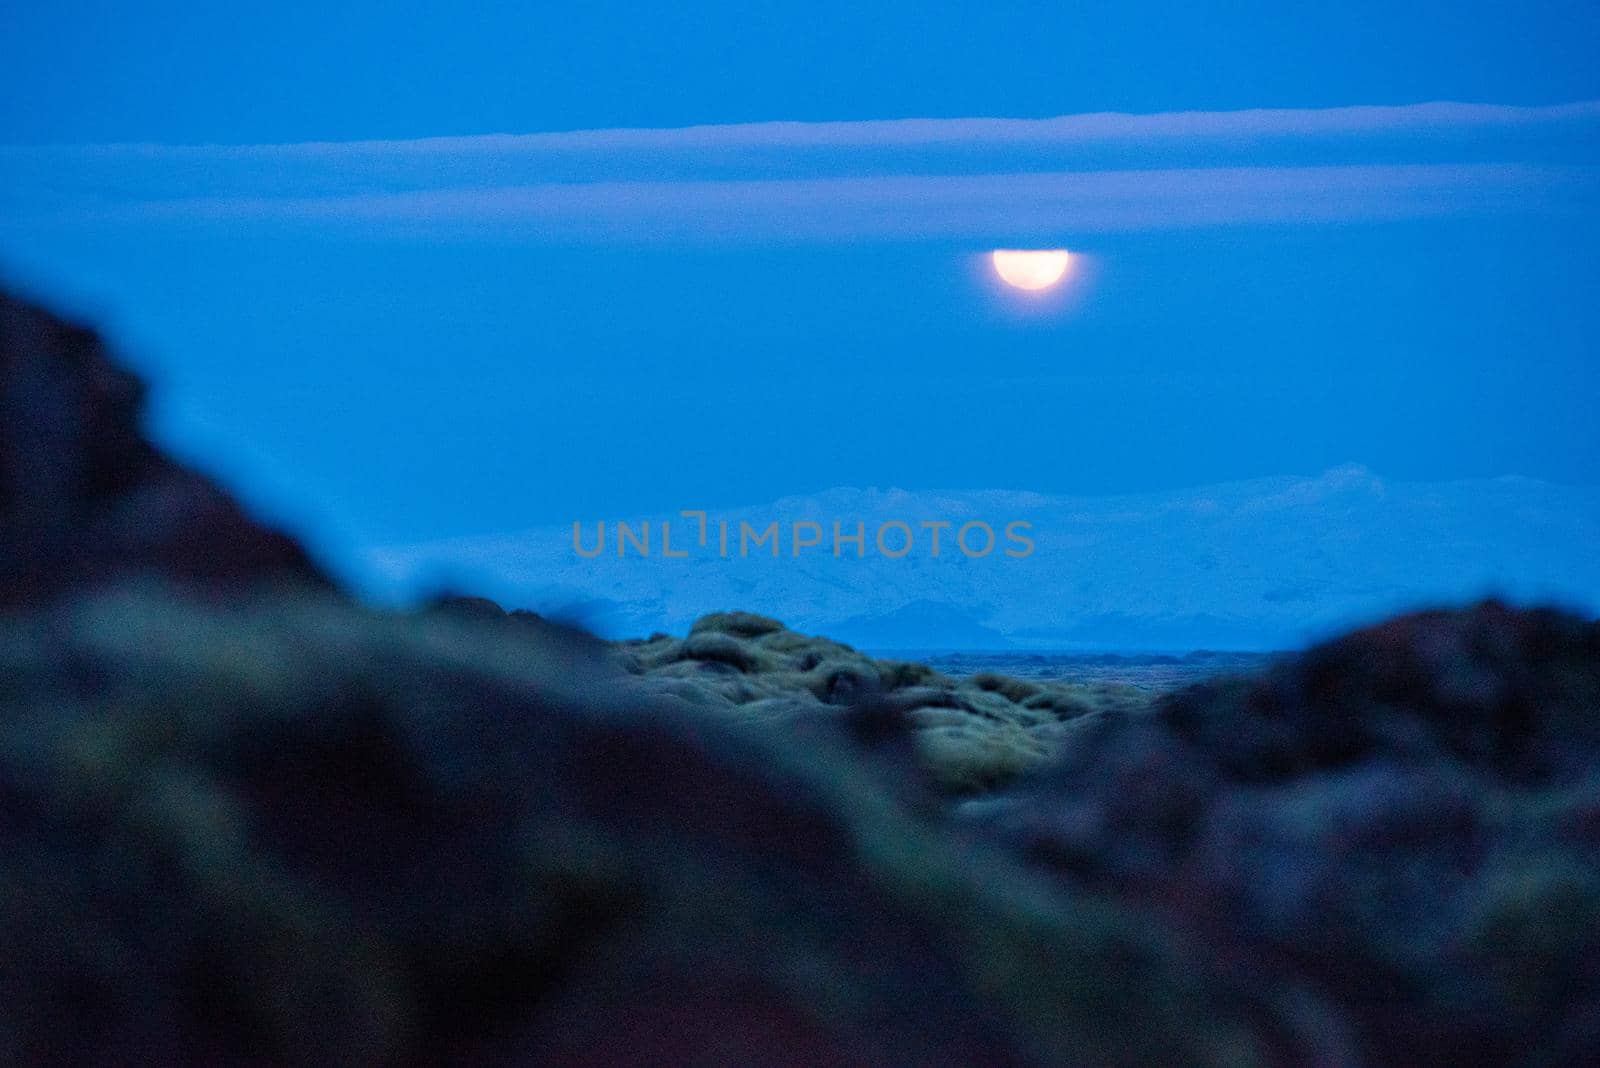 Full moon rising over a glacier in Iceland by jyurinko